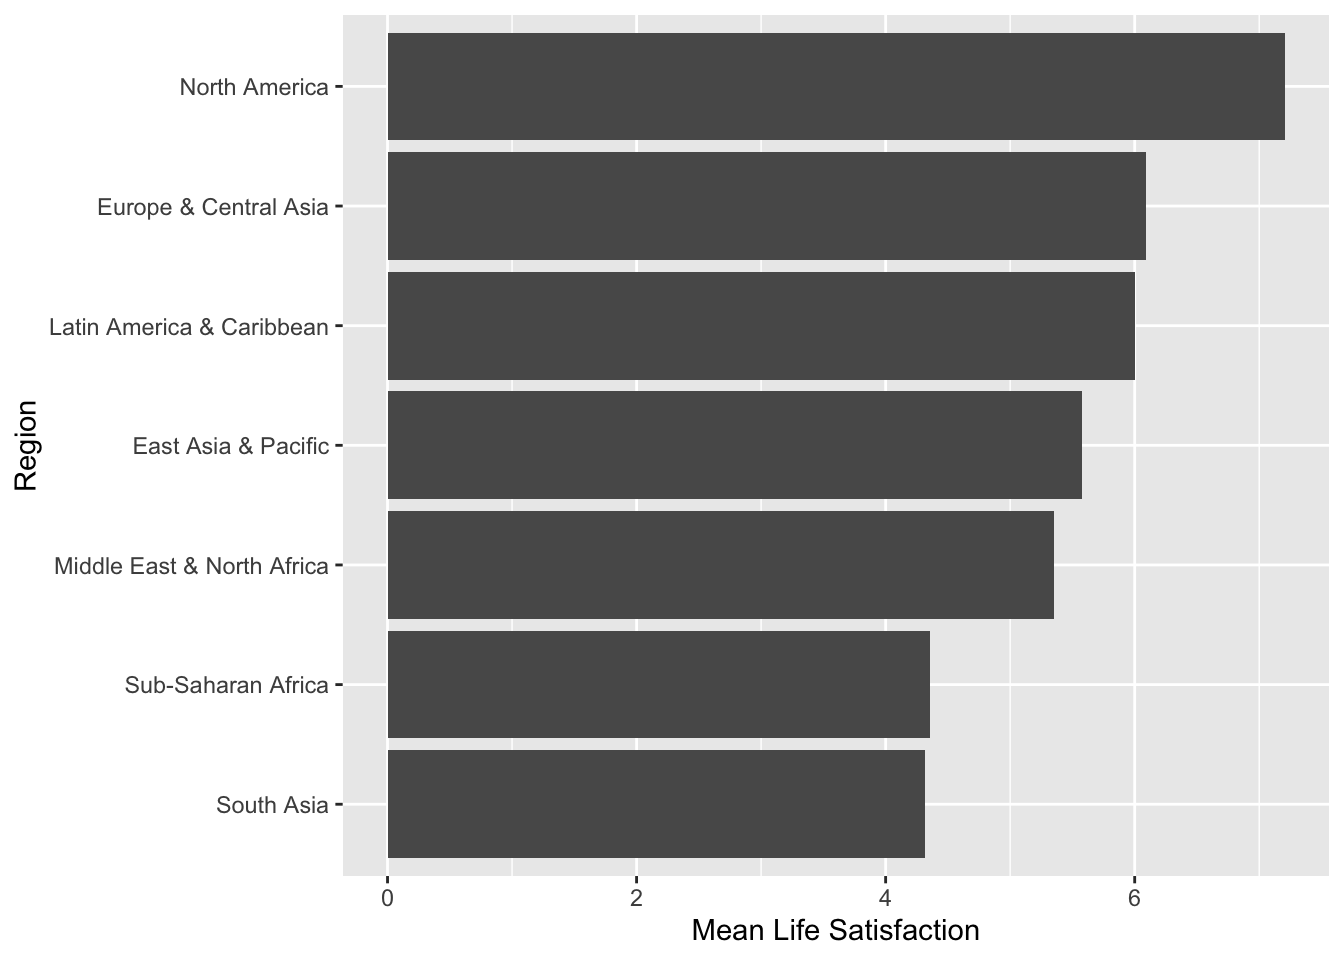 Mean Life Satisfaction by Region in 2017